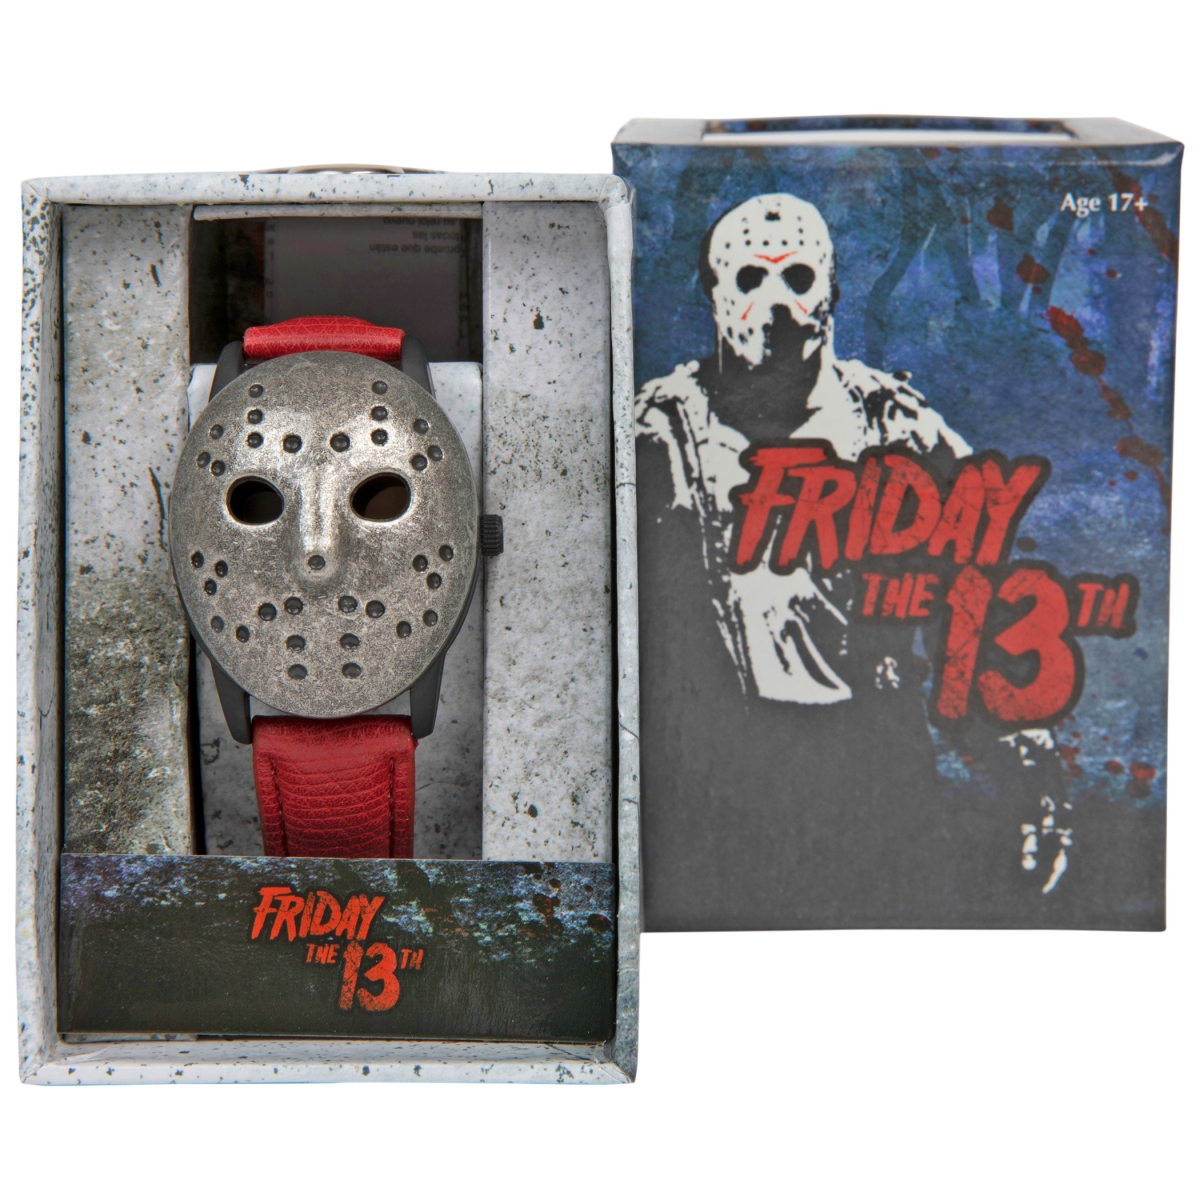 Friday the 13th 834557 Friday the 13th Jason Voorhees Mask Flip-Up Watch Face Cover Watch